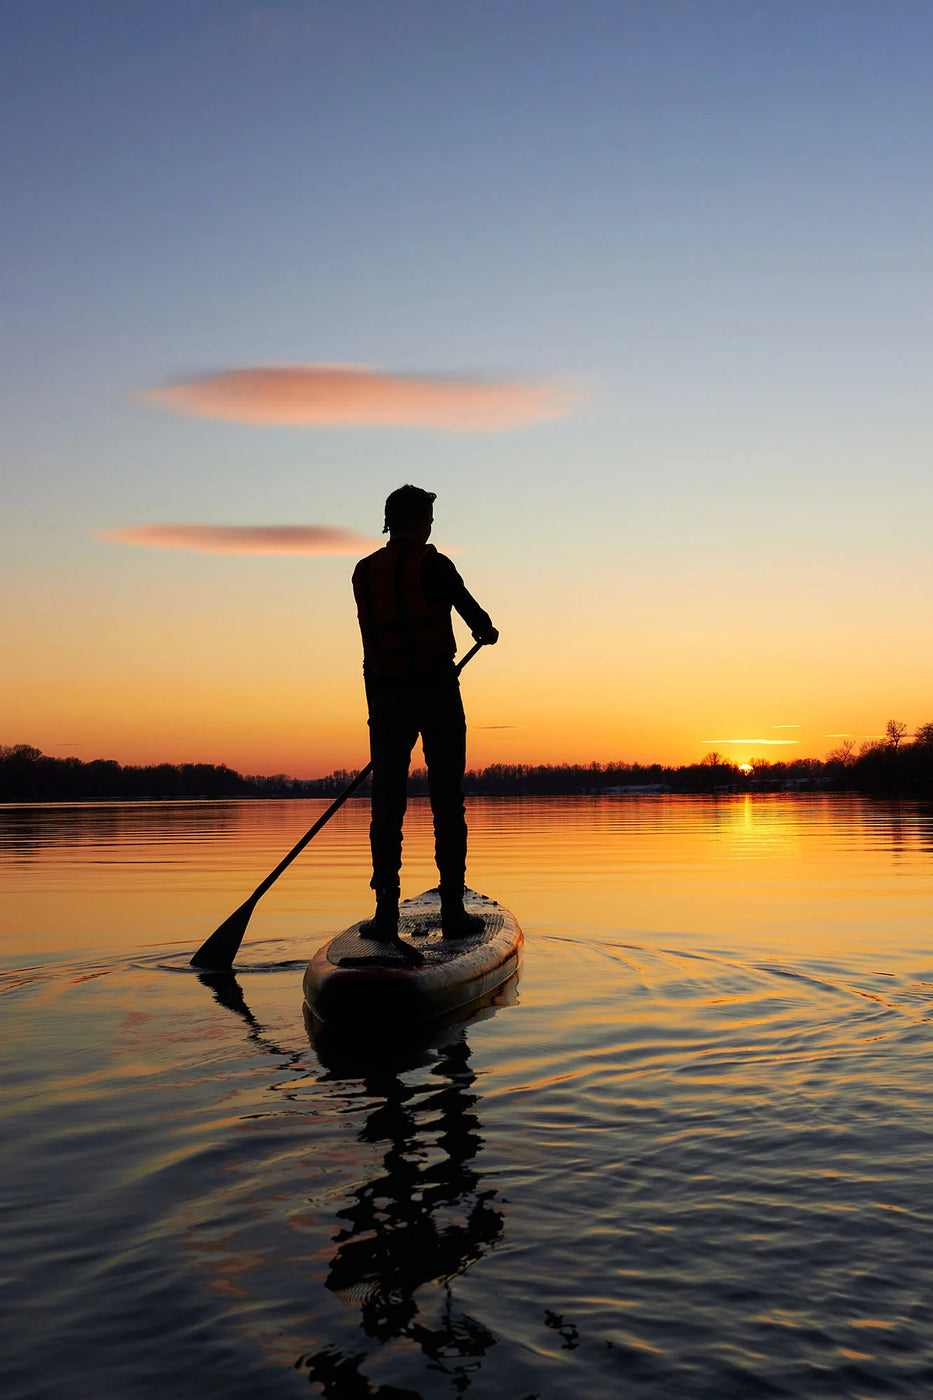 Man on stand-up paddleboard on the water at sunset